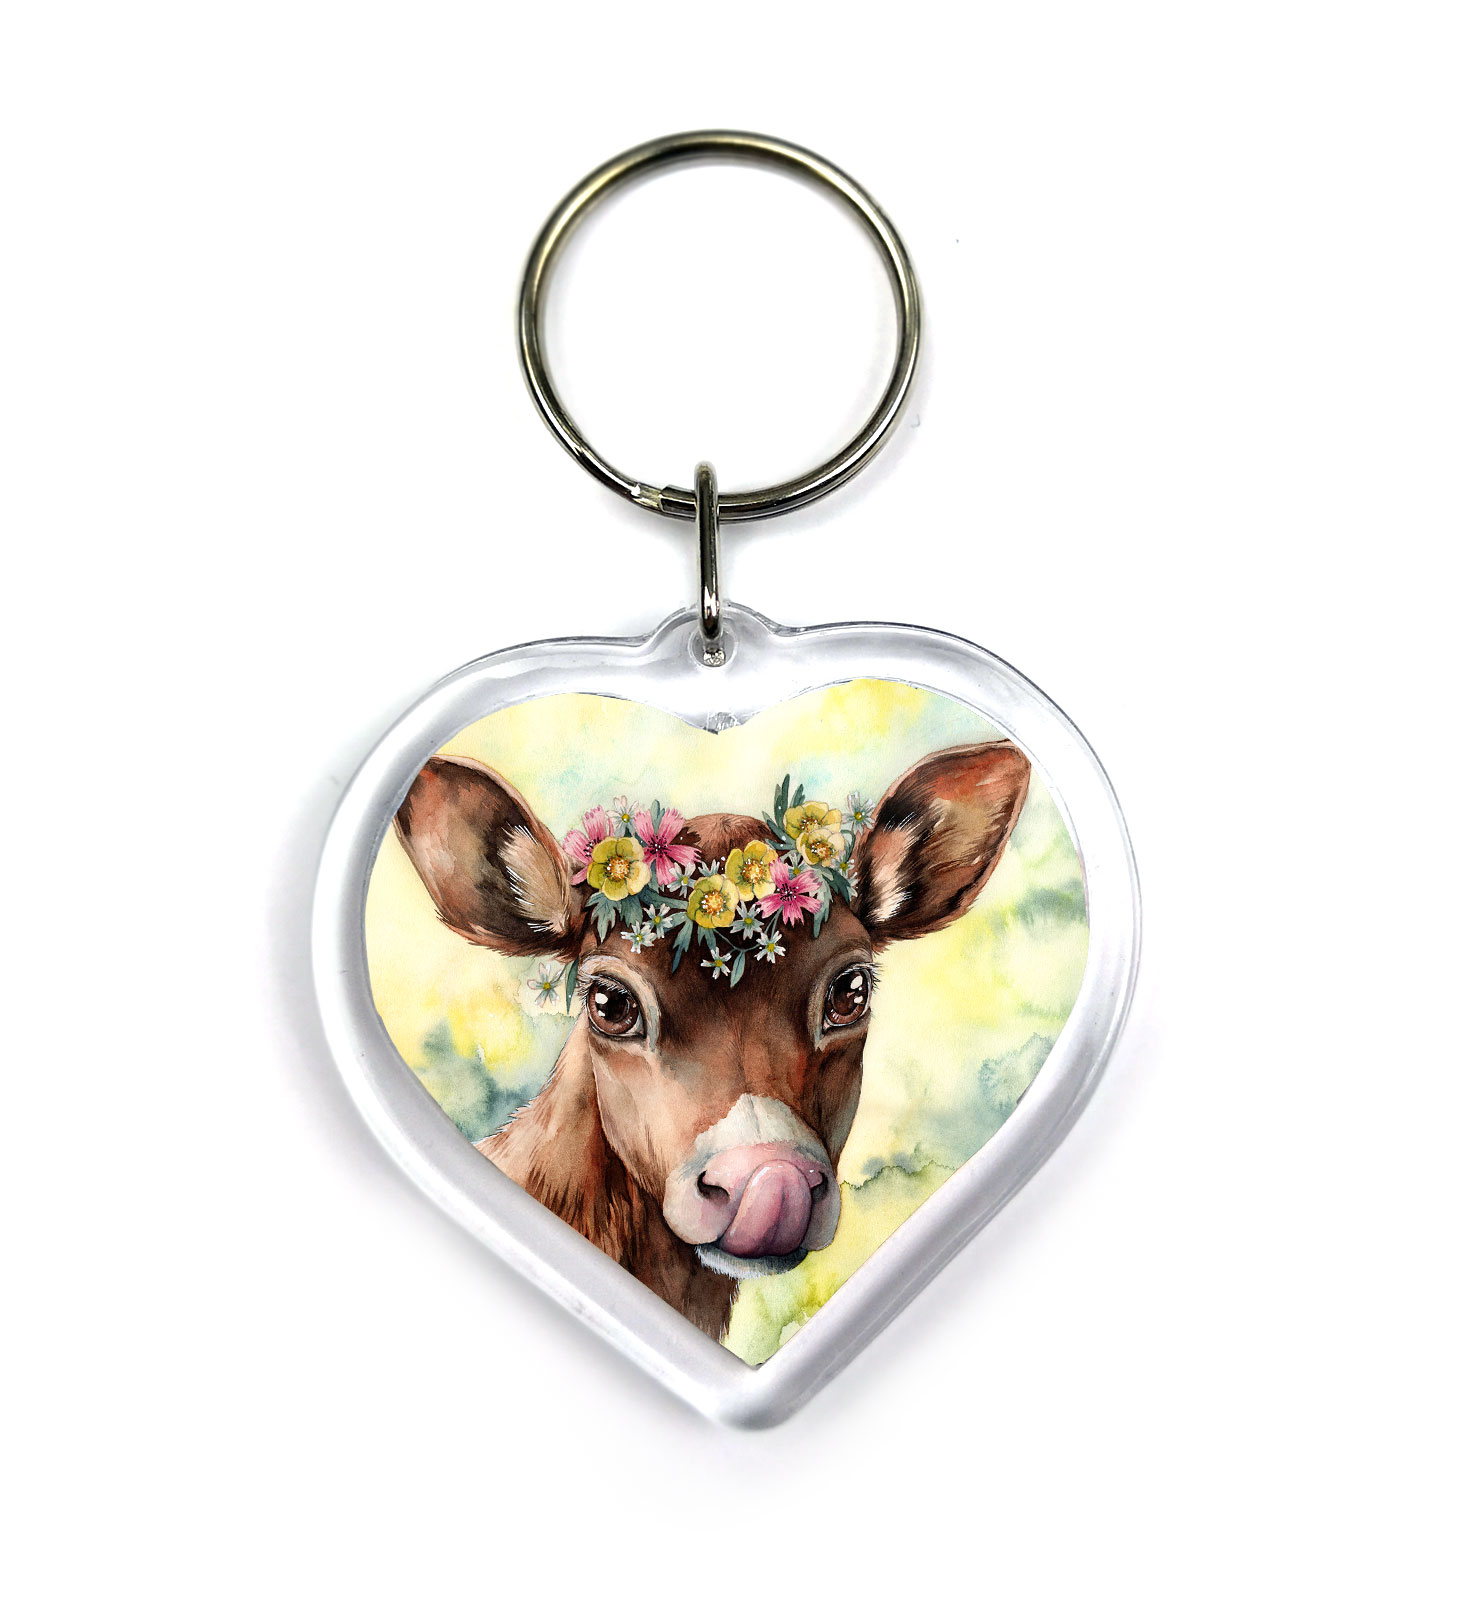 Calf with a Flower Crown